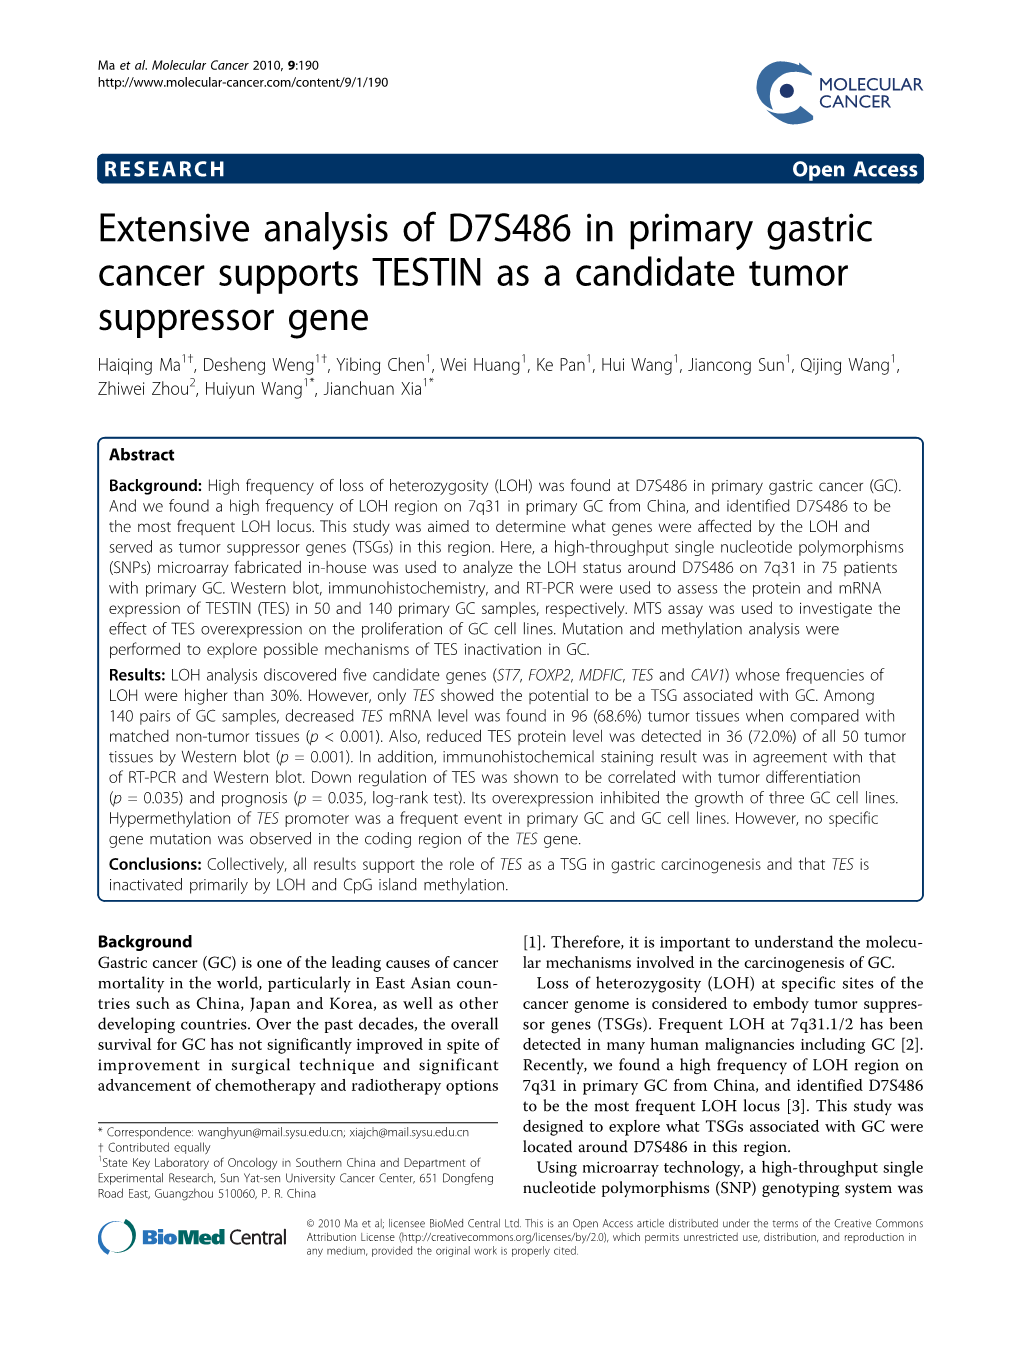 Extensive Analysis of D7S486 in Primary Gastric Cancer Supports TESTIN As a Candidate Tumor Suppressor Gene